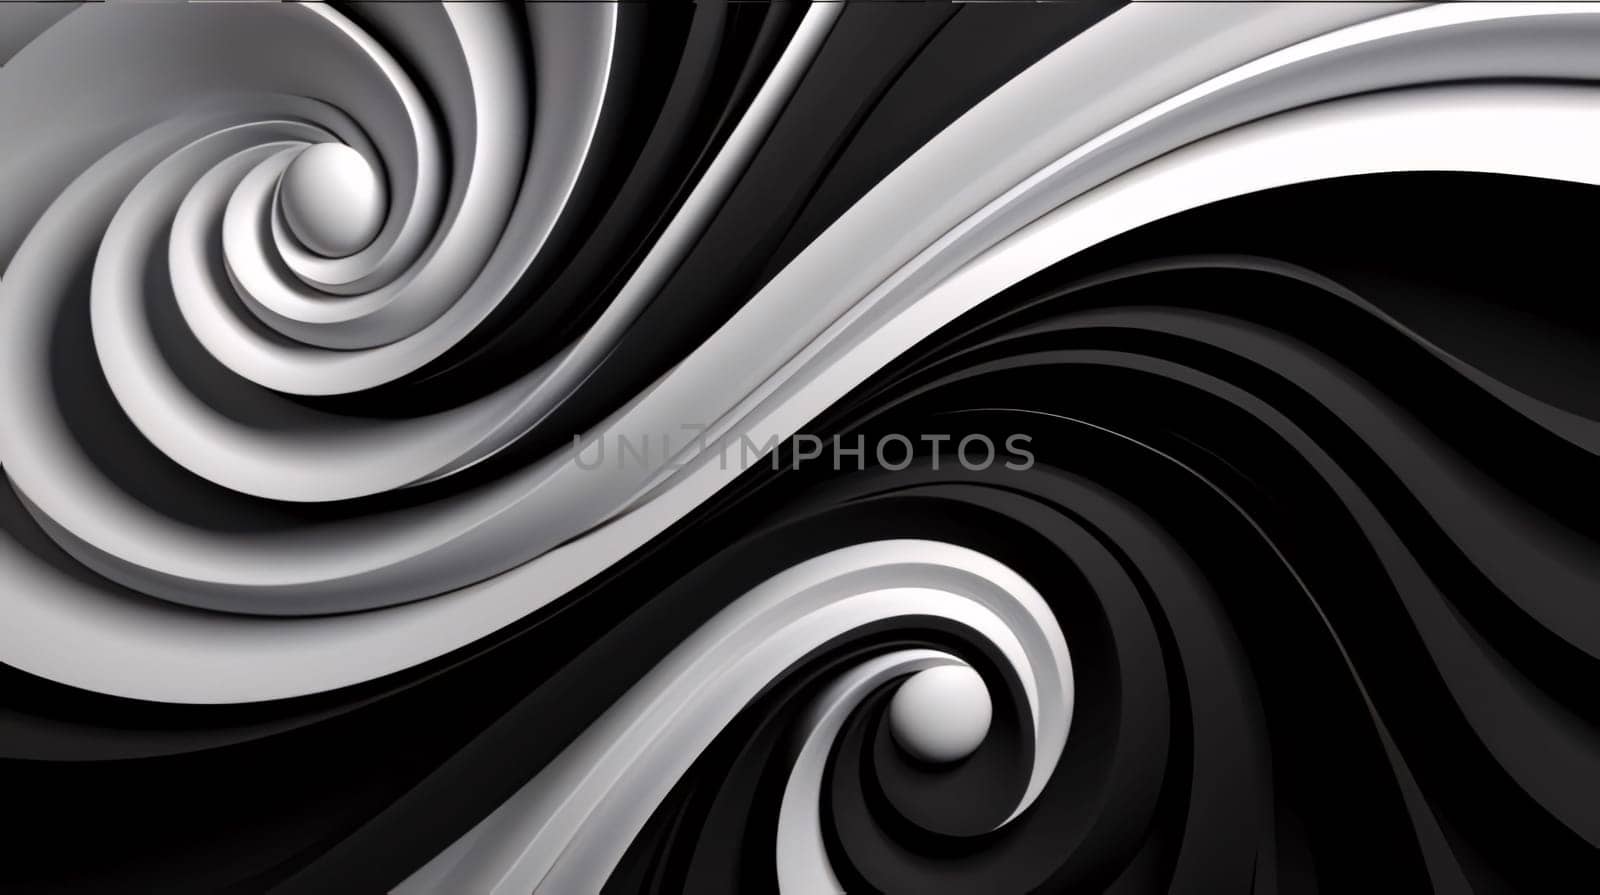 Abstract background design: Abstract black and white wavy background. 3d rendering, 3d illustration.